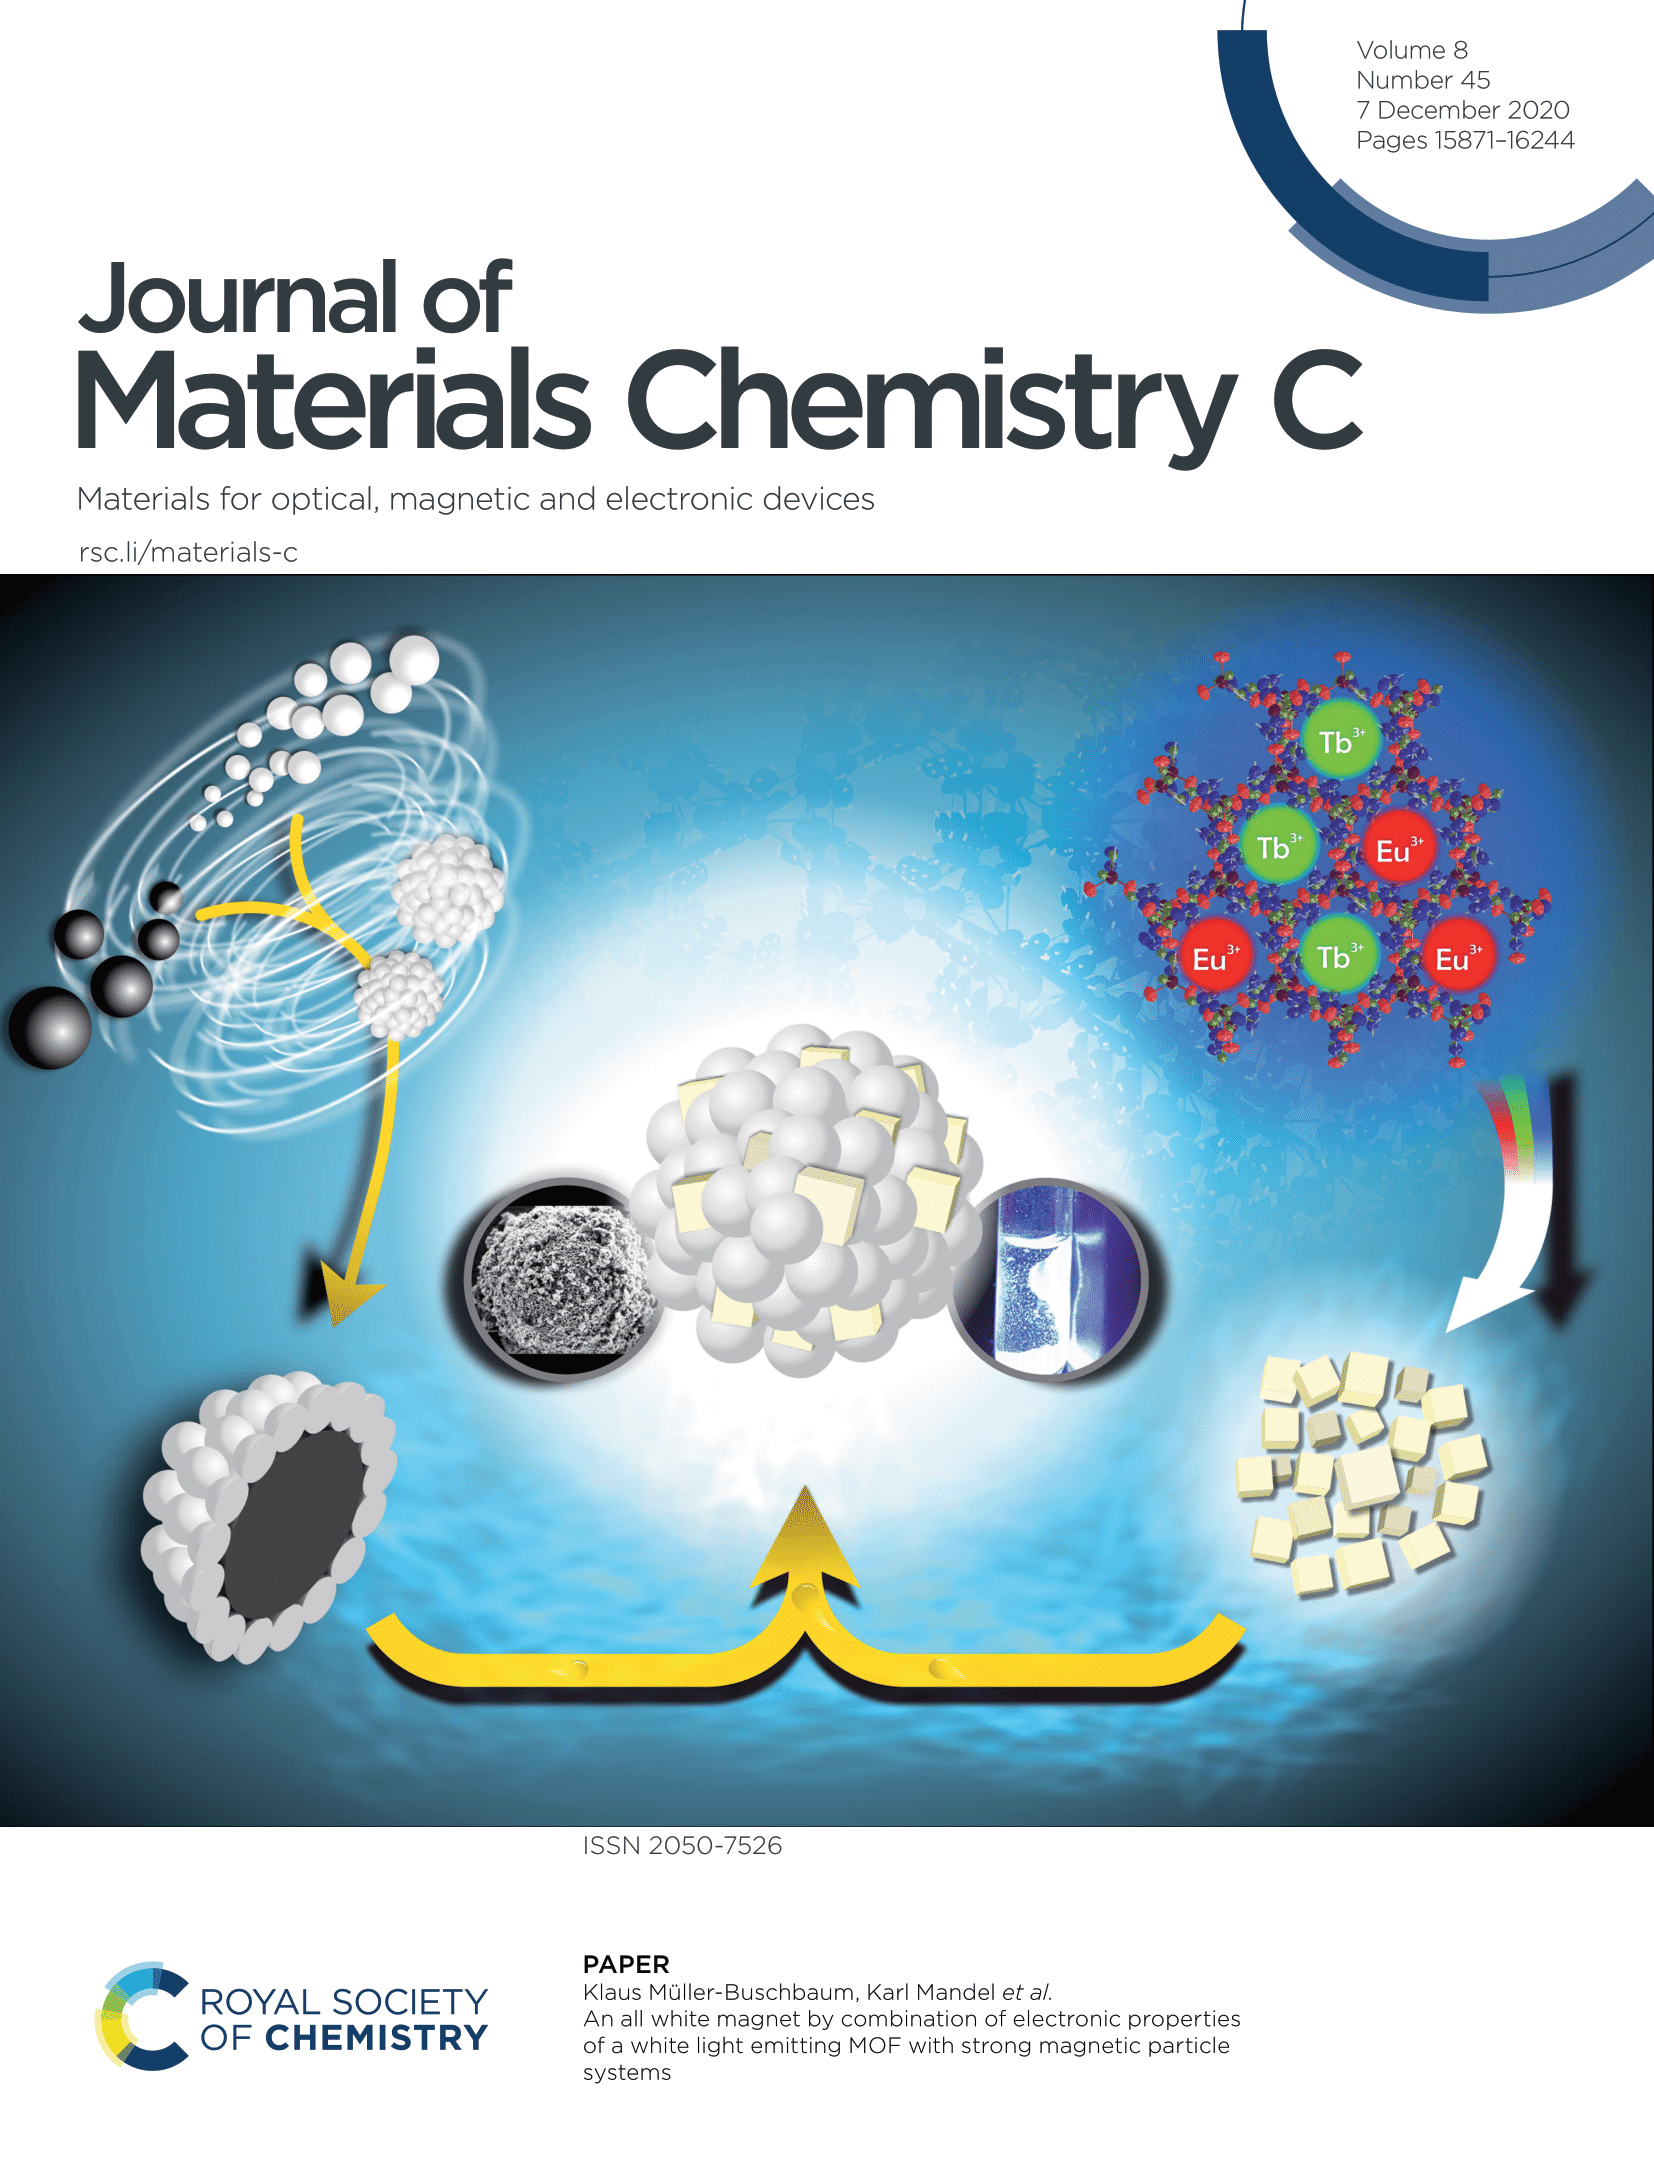 New cover art Journal of Materials Chemistry C › Department of